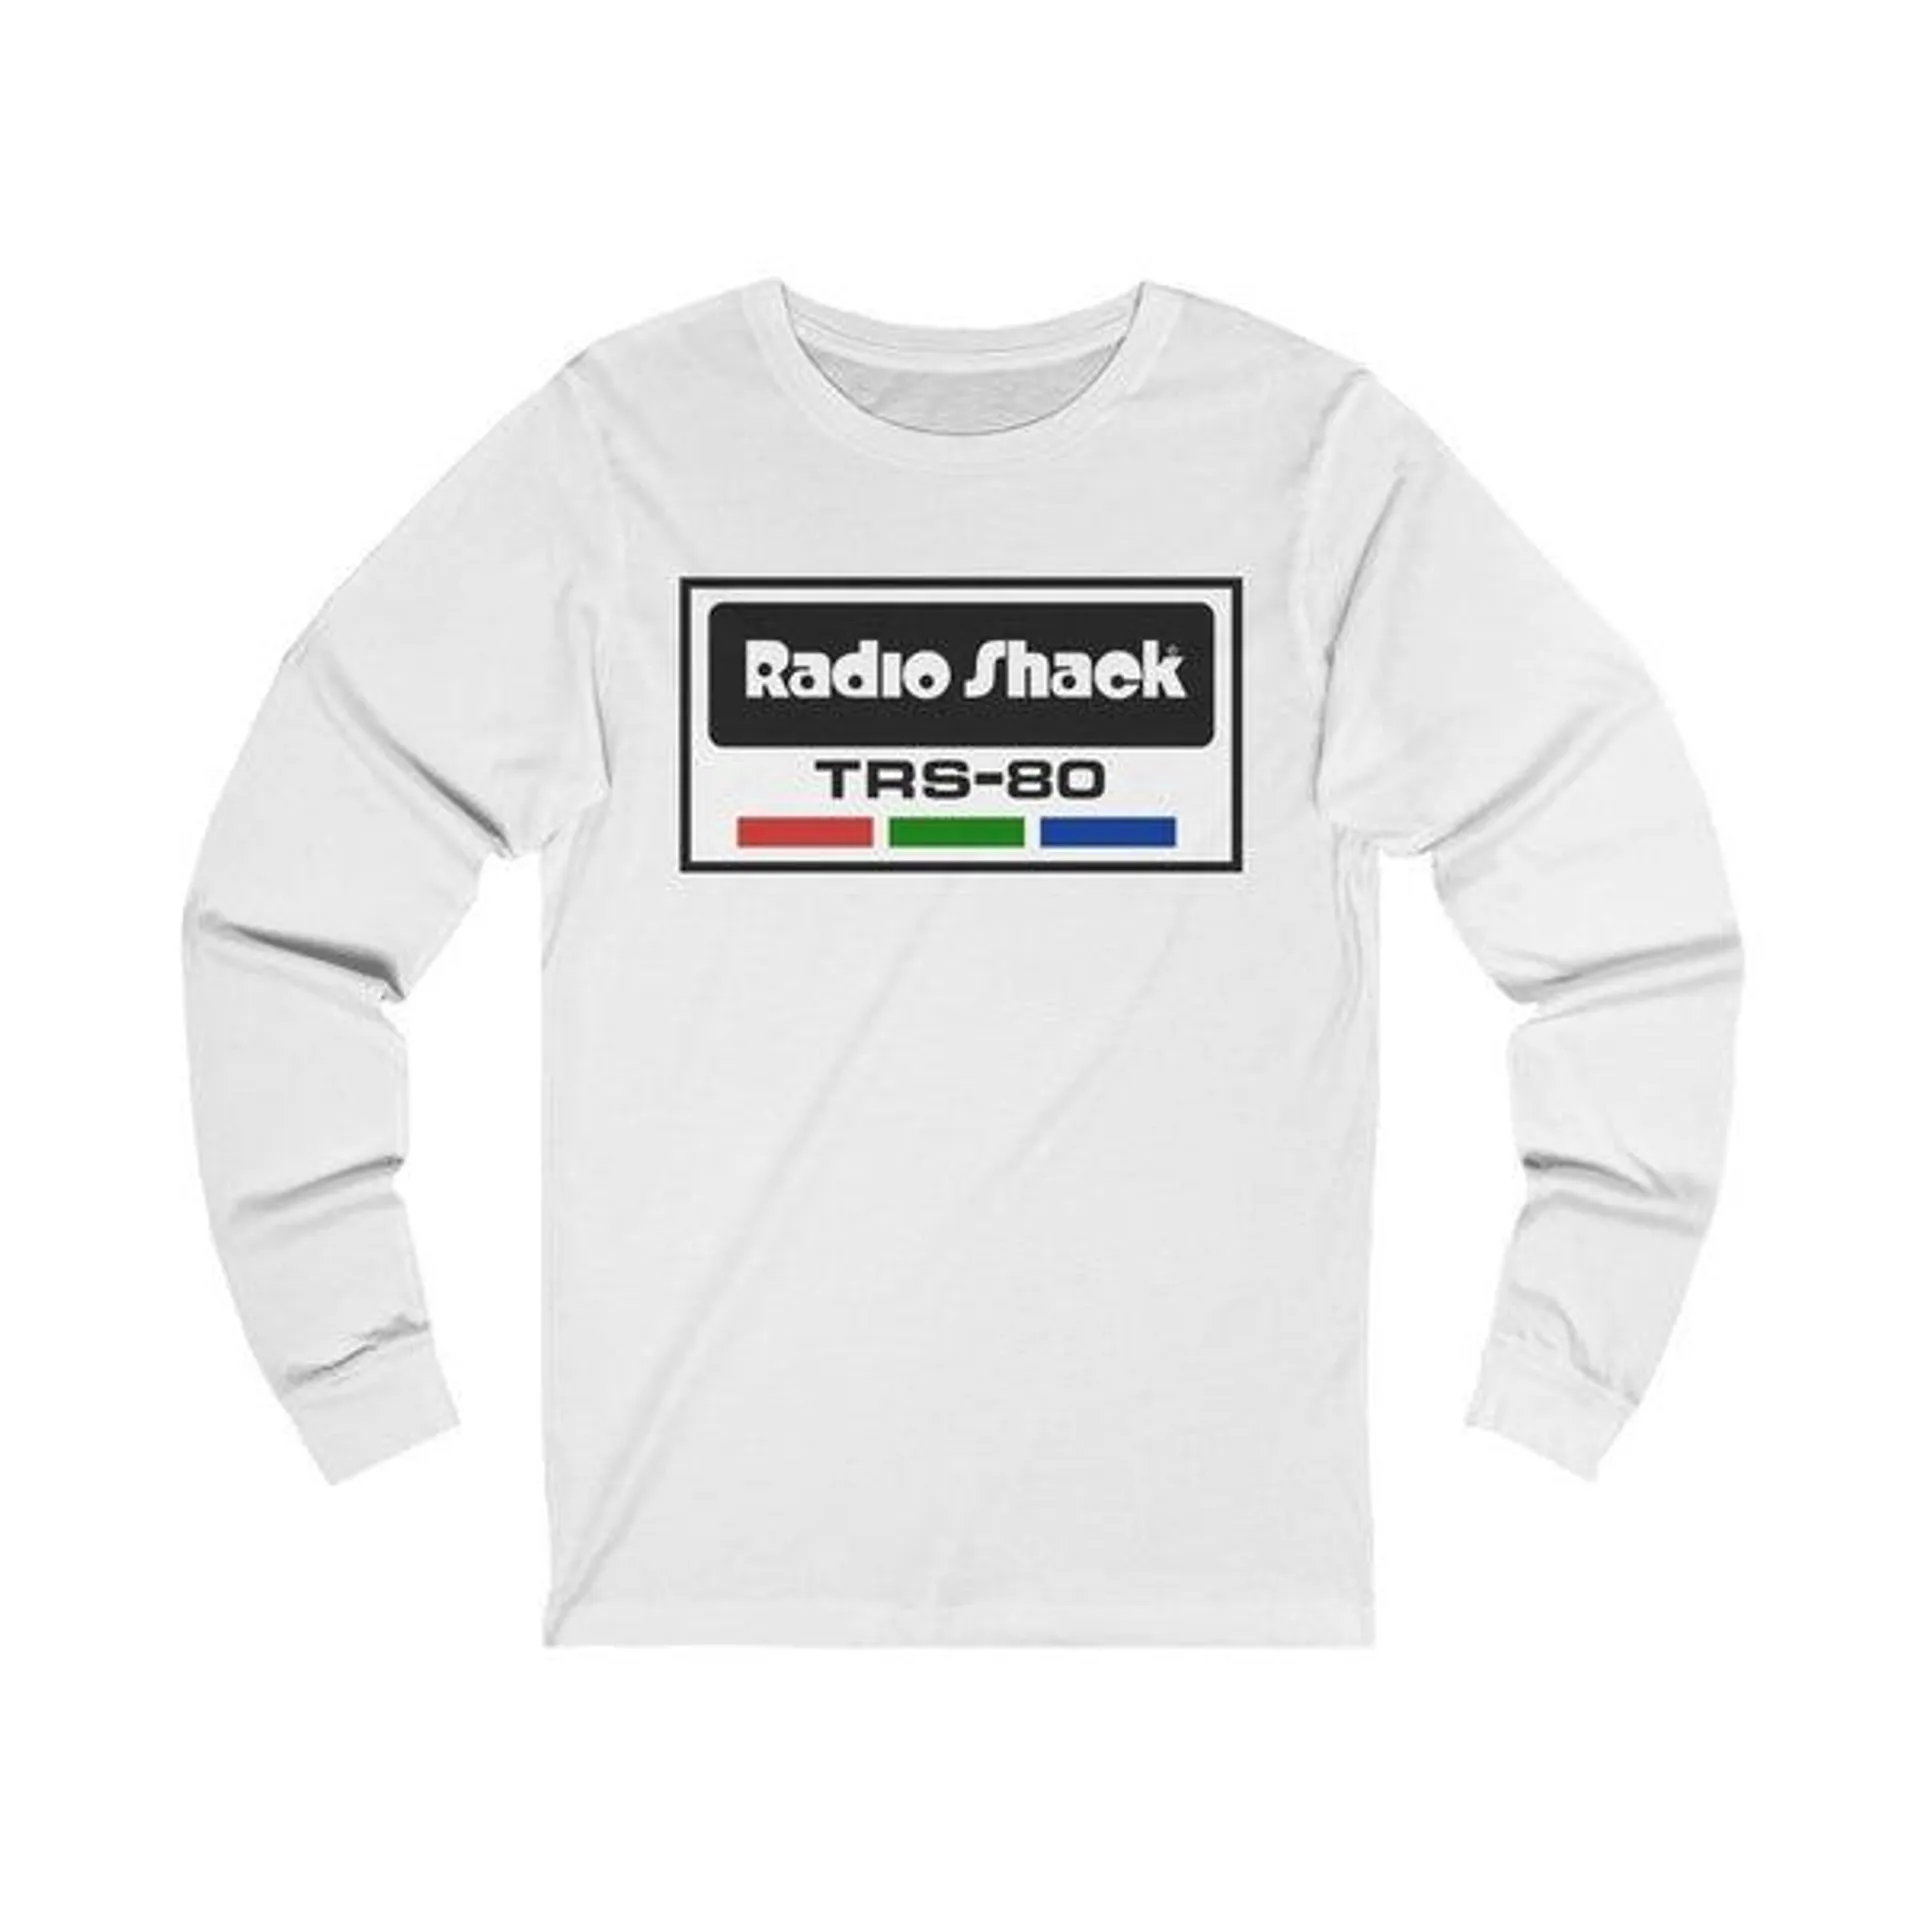 Tandy TRS-80 "CoCo" Badge Long Sleeve T-Shirt